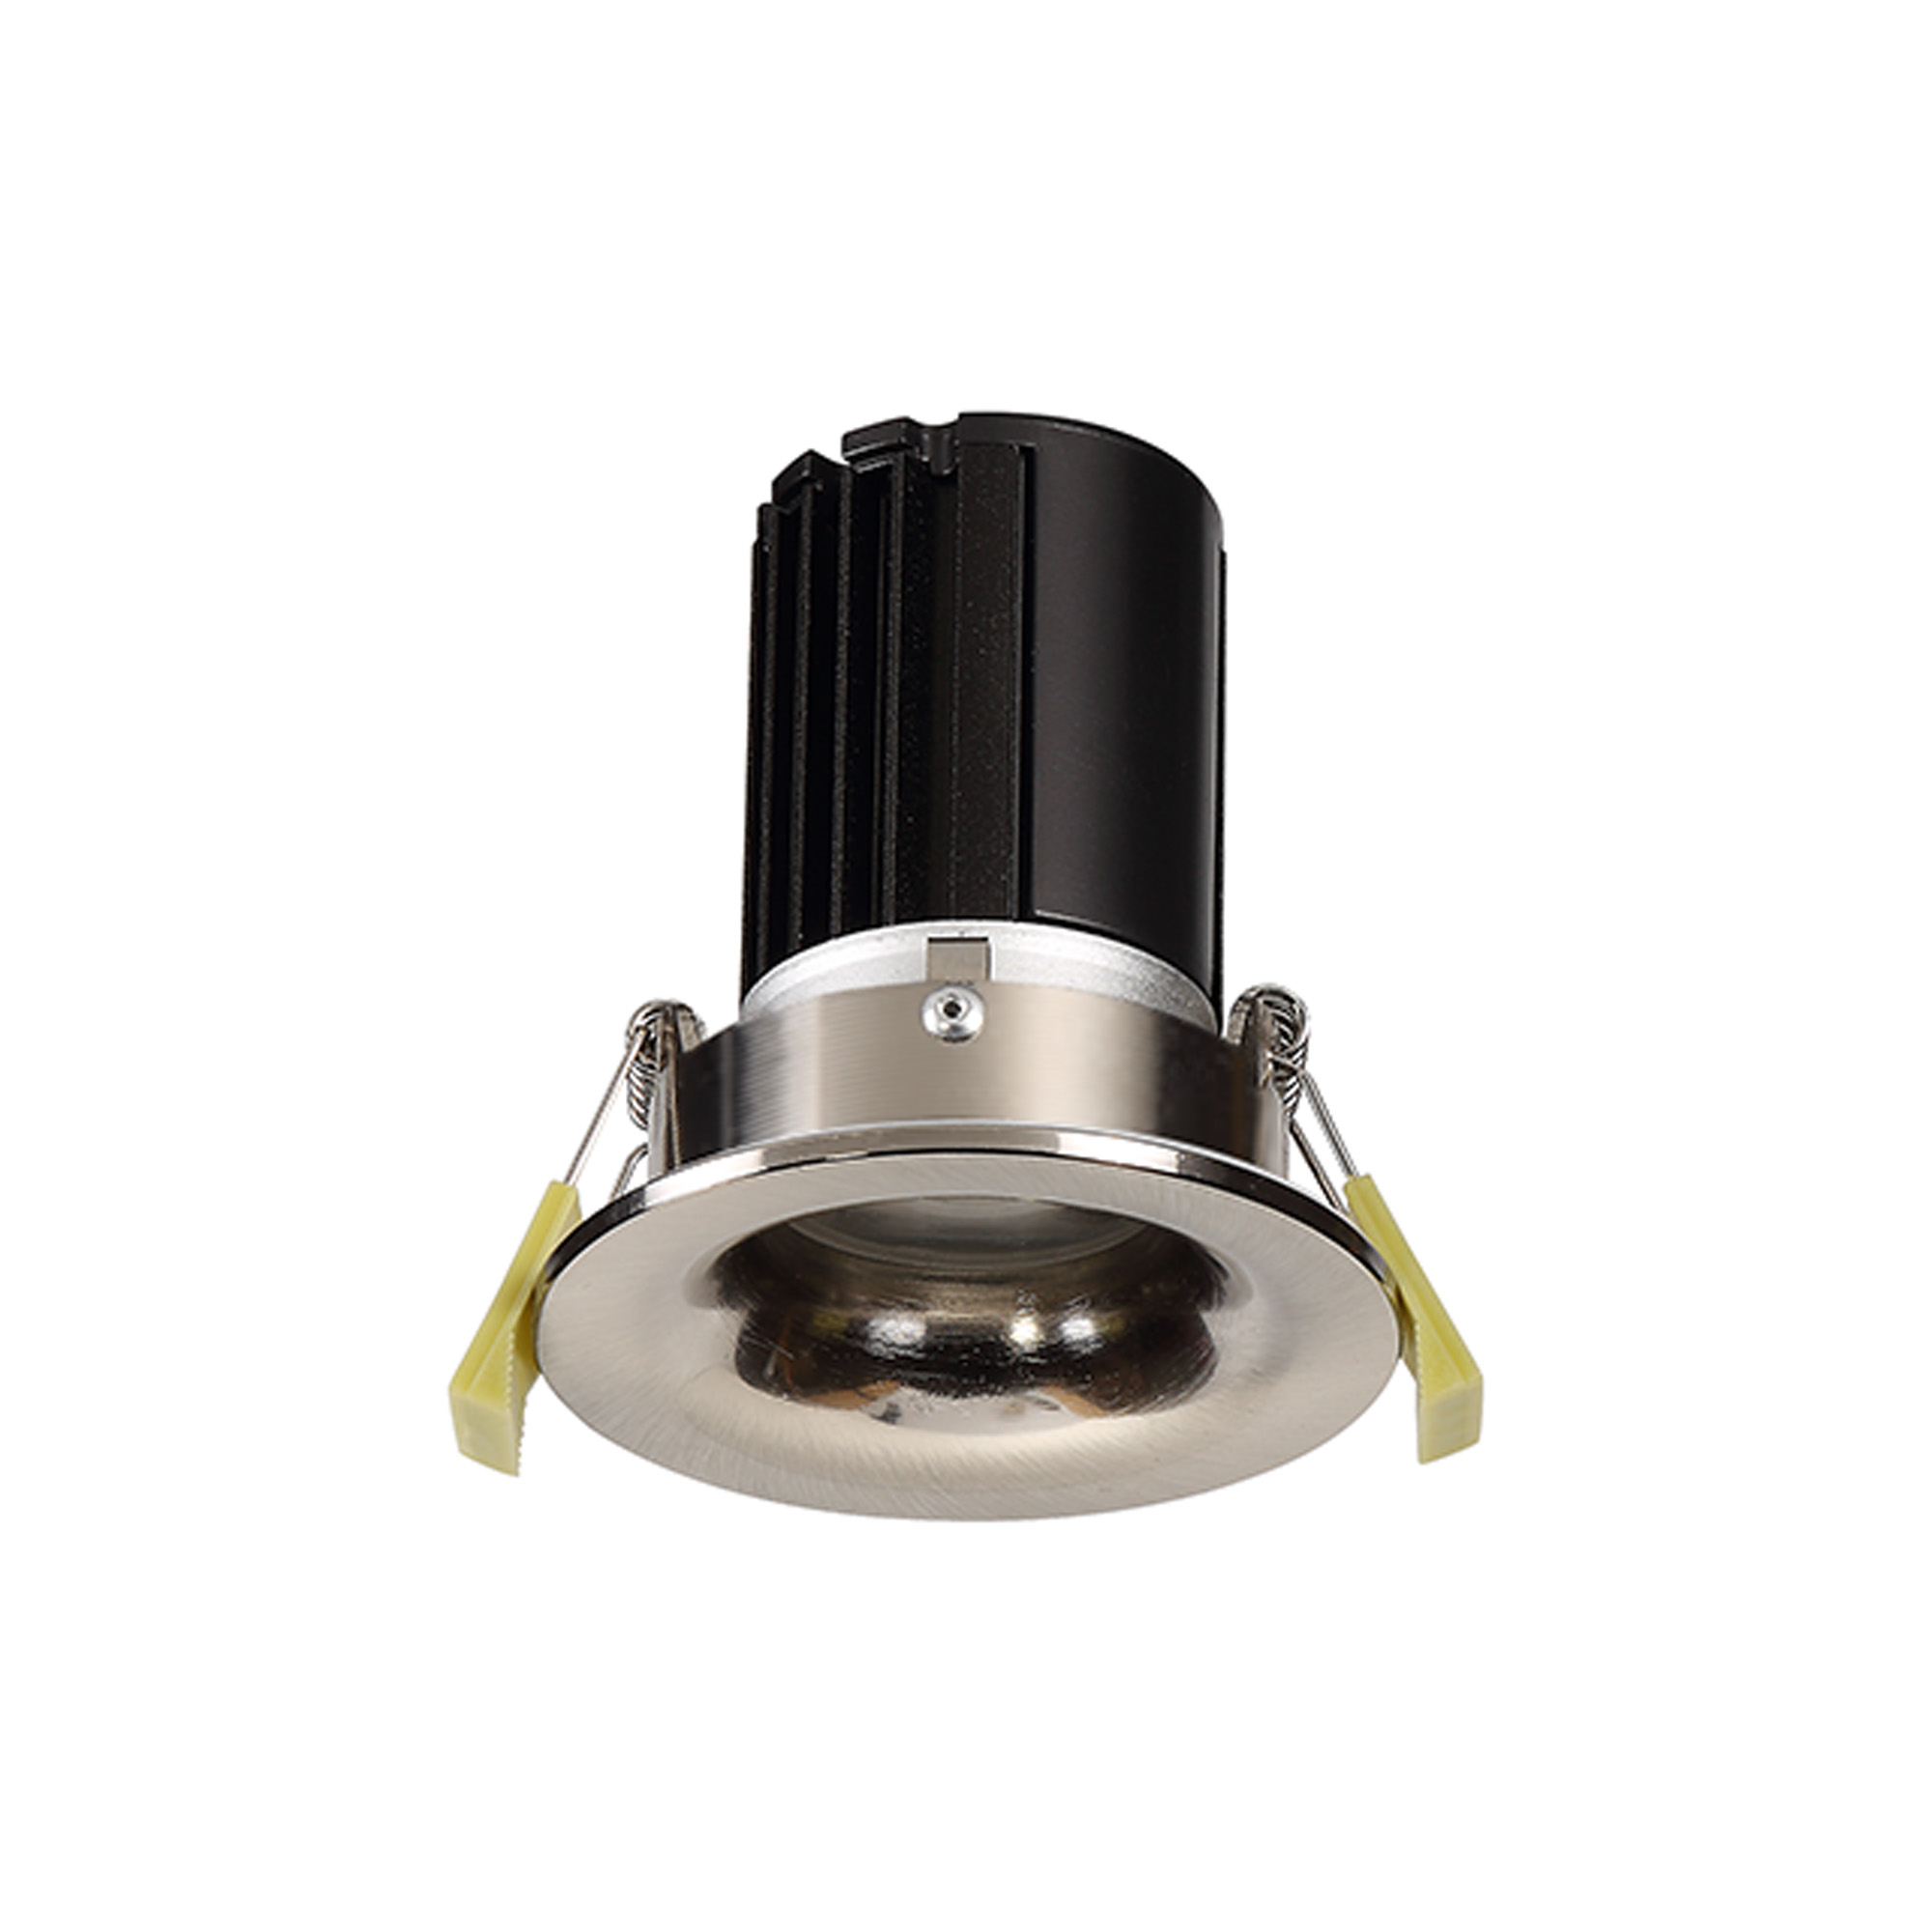 DM201546  Bruve 12 Tridonic powered 12W 2700K 1200lm 12° LED Engine;350mA ; CRI>90 LED Engine Satin Nickel Fixed Round Recessed Downlight; Inner Glass cover; IP65